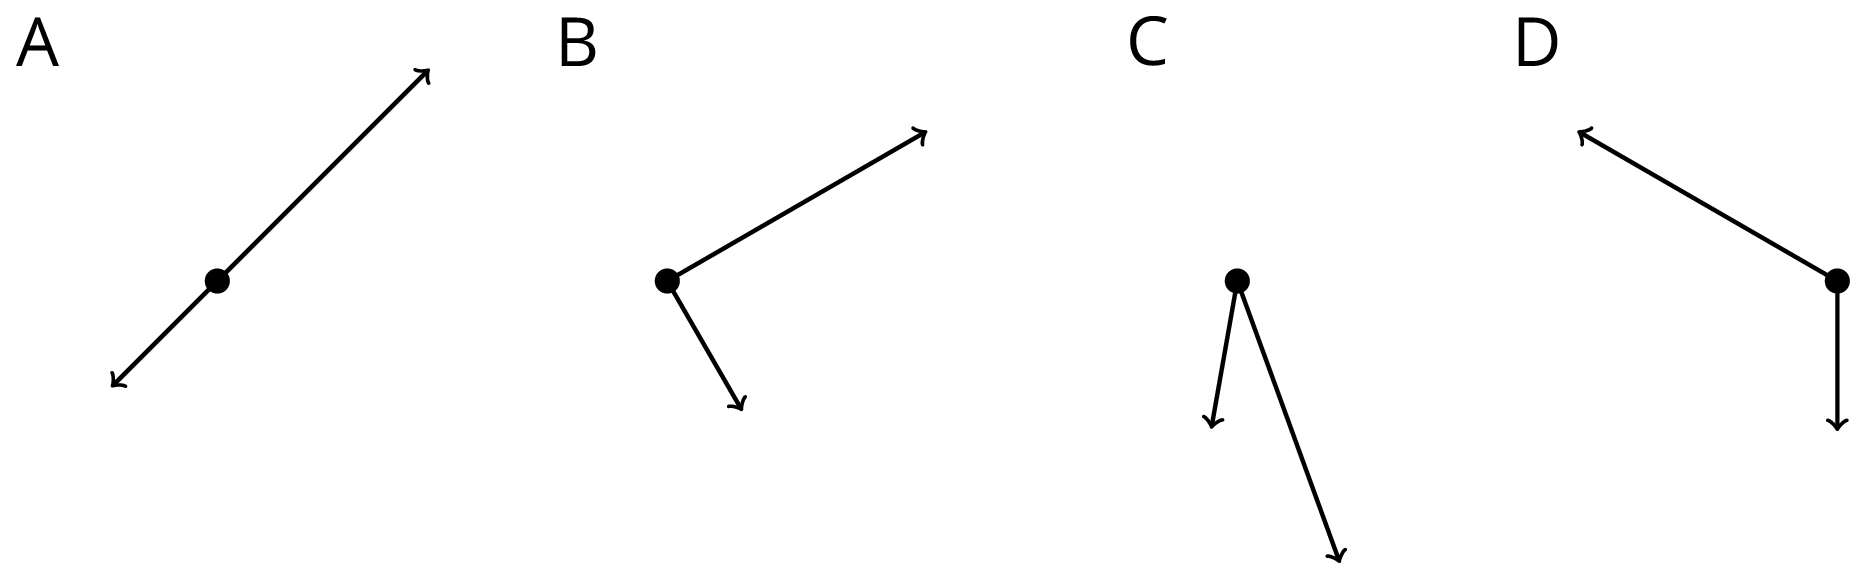 Four figures labeled A, B, C, and D. each figure is composed of two rays and a point that is located at the endpoints of the two rays.  In figure A the two rays point in opposite directions. In figure B, one ray extends downward and to the right and the other ray extends upward and to the right. the two rays appear to form a right angle. In figure C, one ray extends downward and slightly to the left and the other ray extends downward and slightly to the right. The two rays appear to form an acute angle. In figure D, one ray extends upward and to the left and the other ray extends directly downward. The two rays appear to form an obtuse angle.